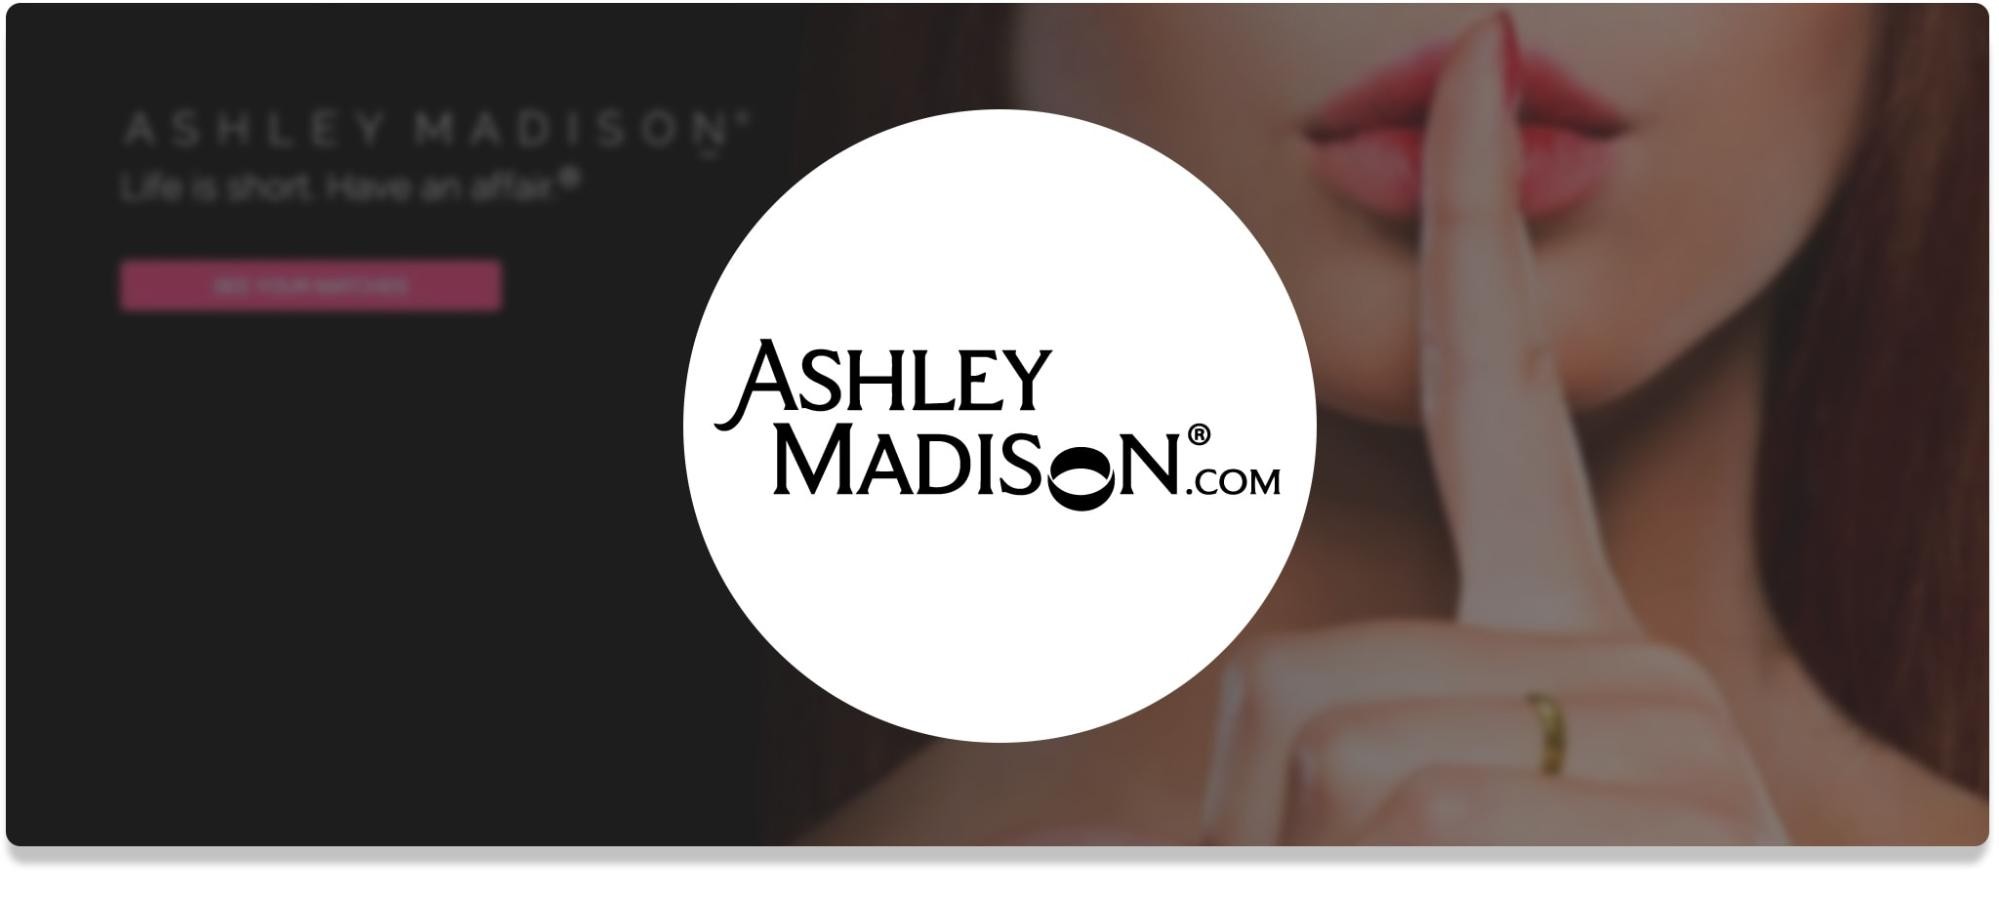 Ashley Madison: My Experience Using the Affair Site (Full Review)